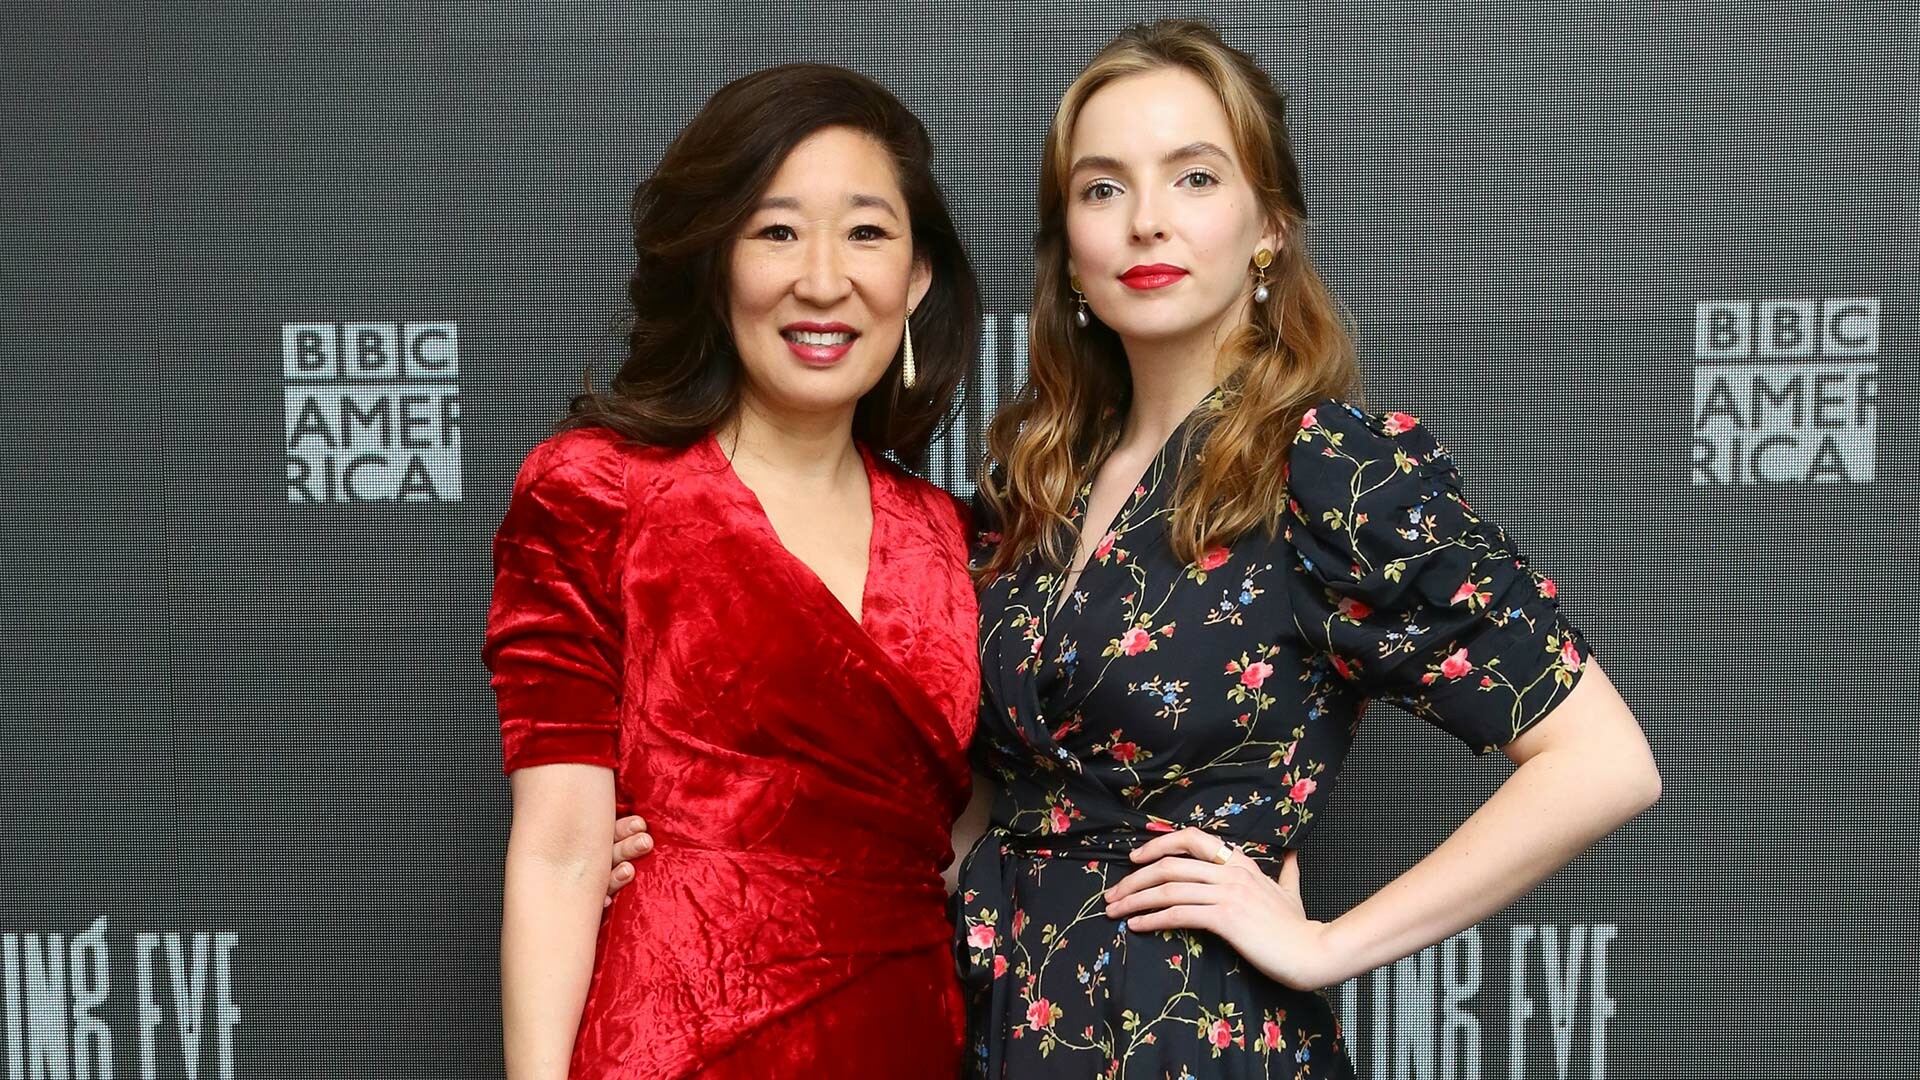 Killing Eve: The fourth (and final) season premiered on 27 February 2022 on BBC America. 1920x1080 Full HD Wallpaper.